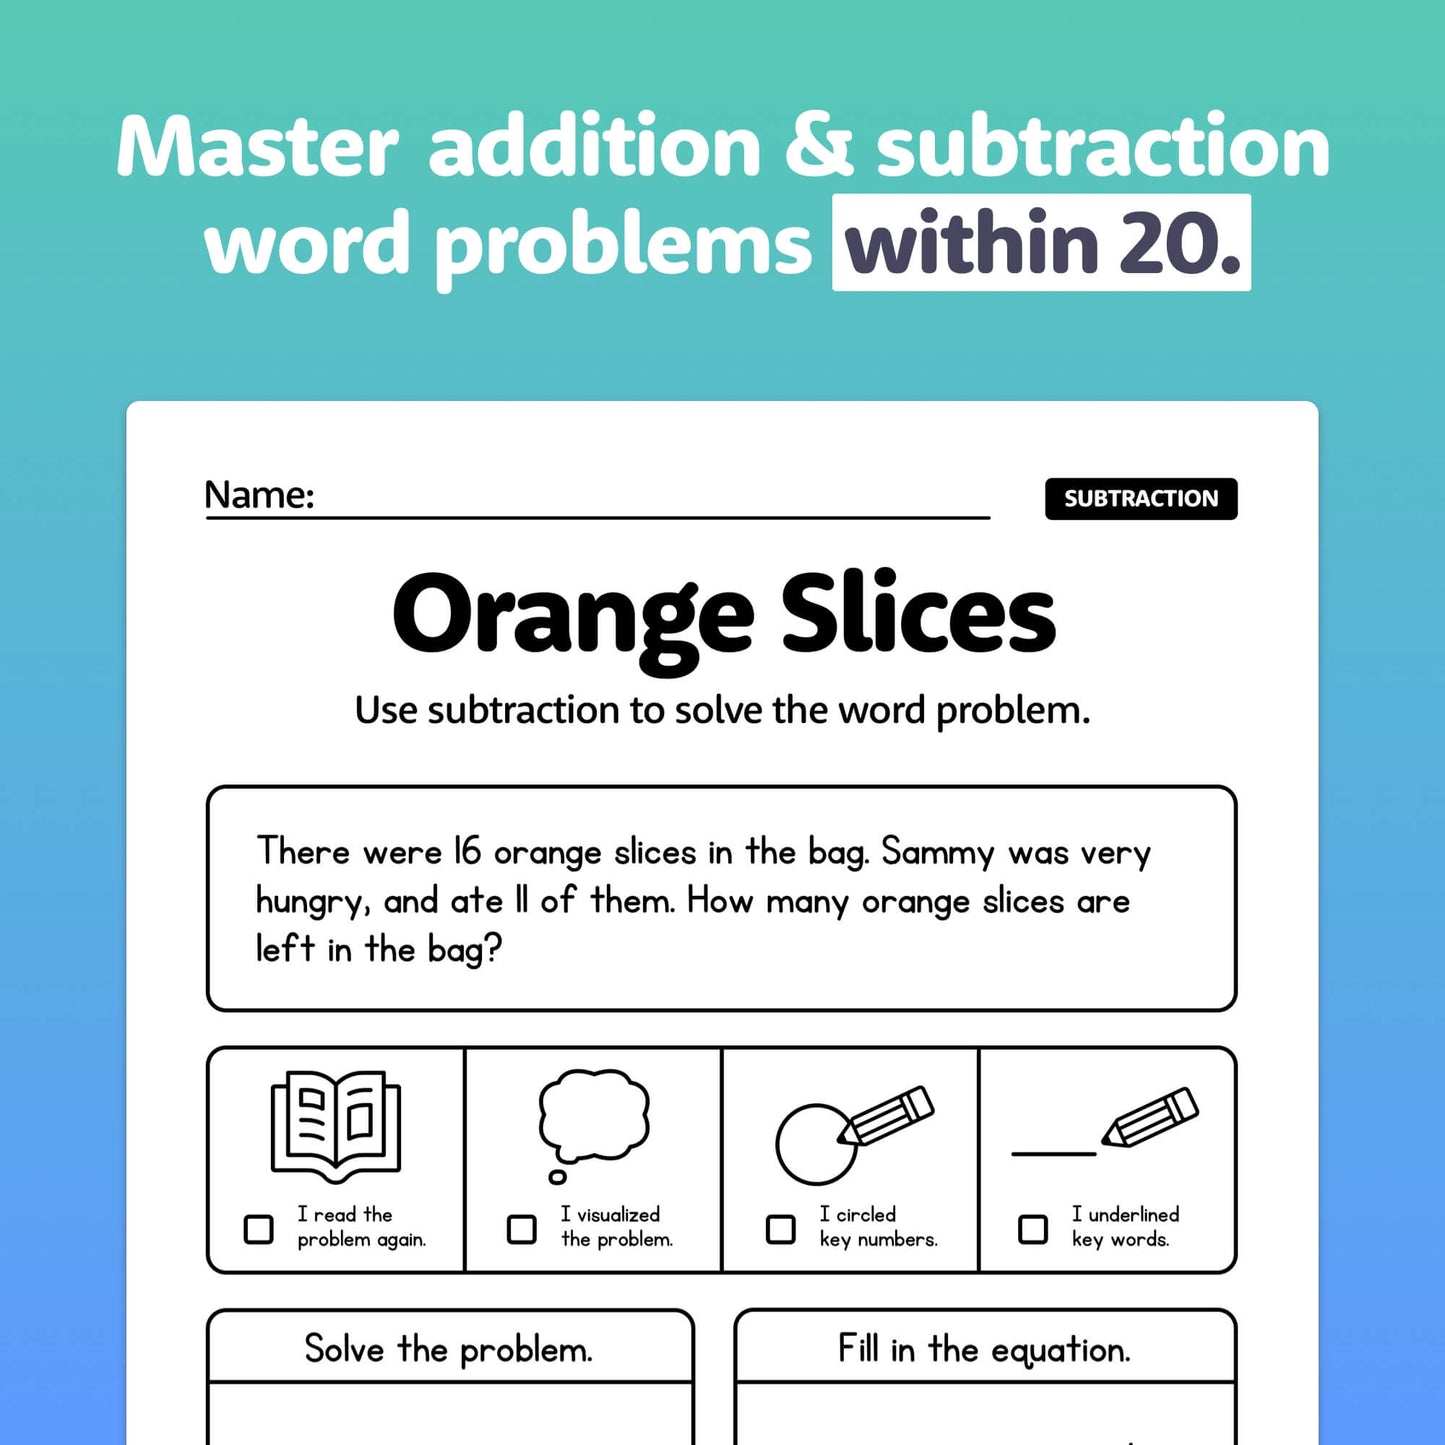 subtraction word problems within 20 printable